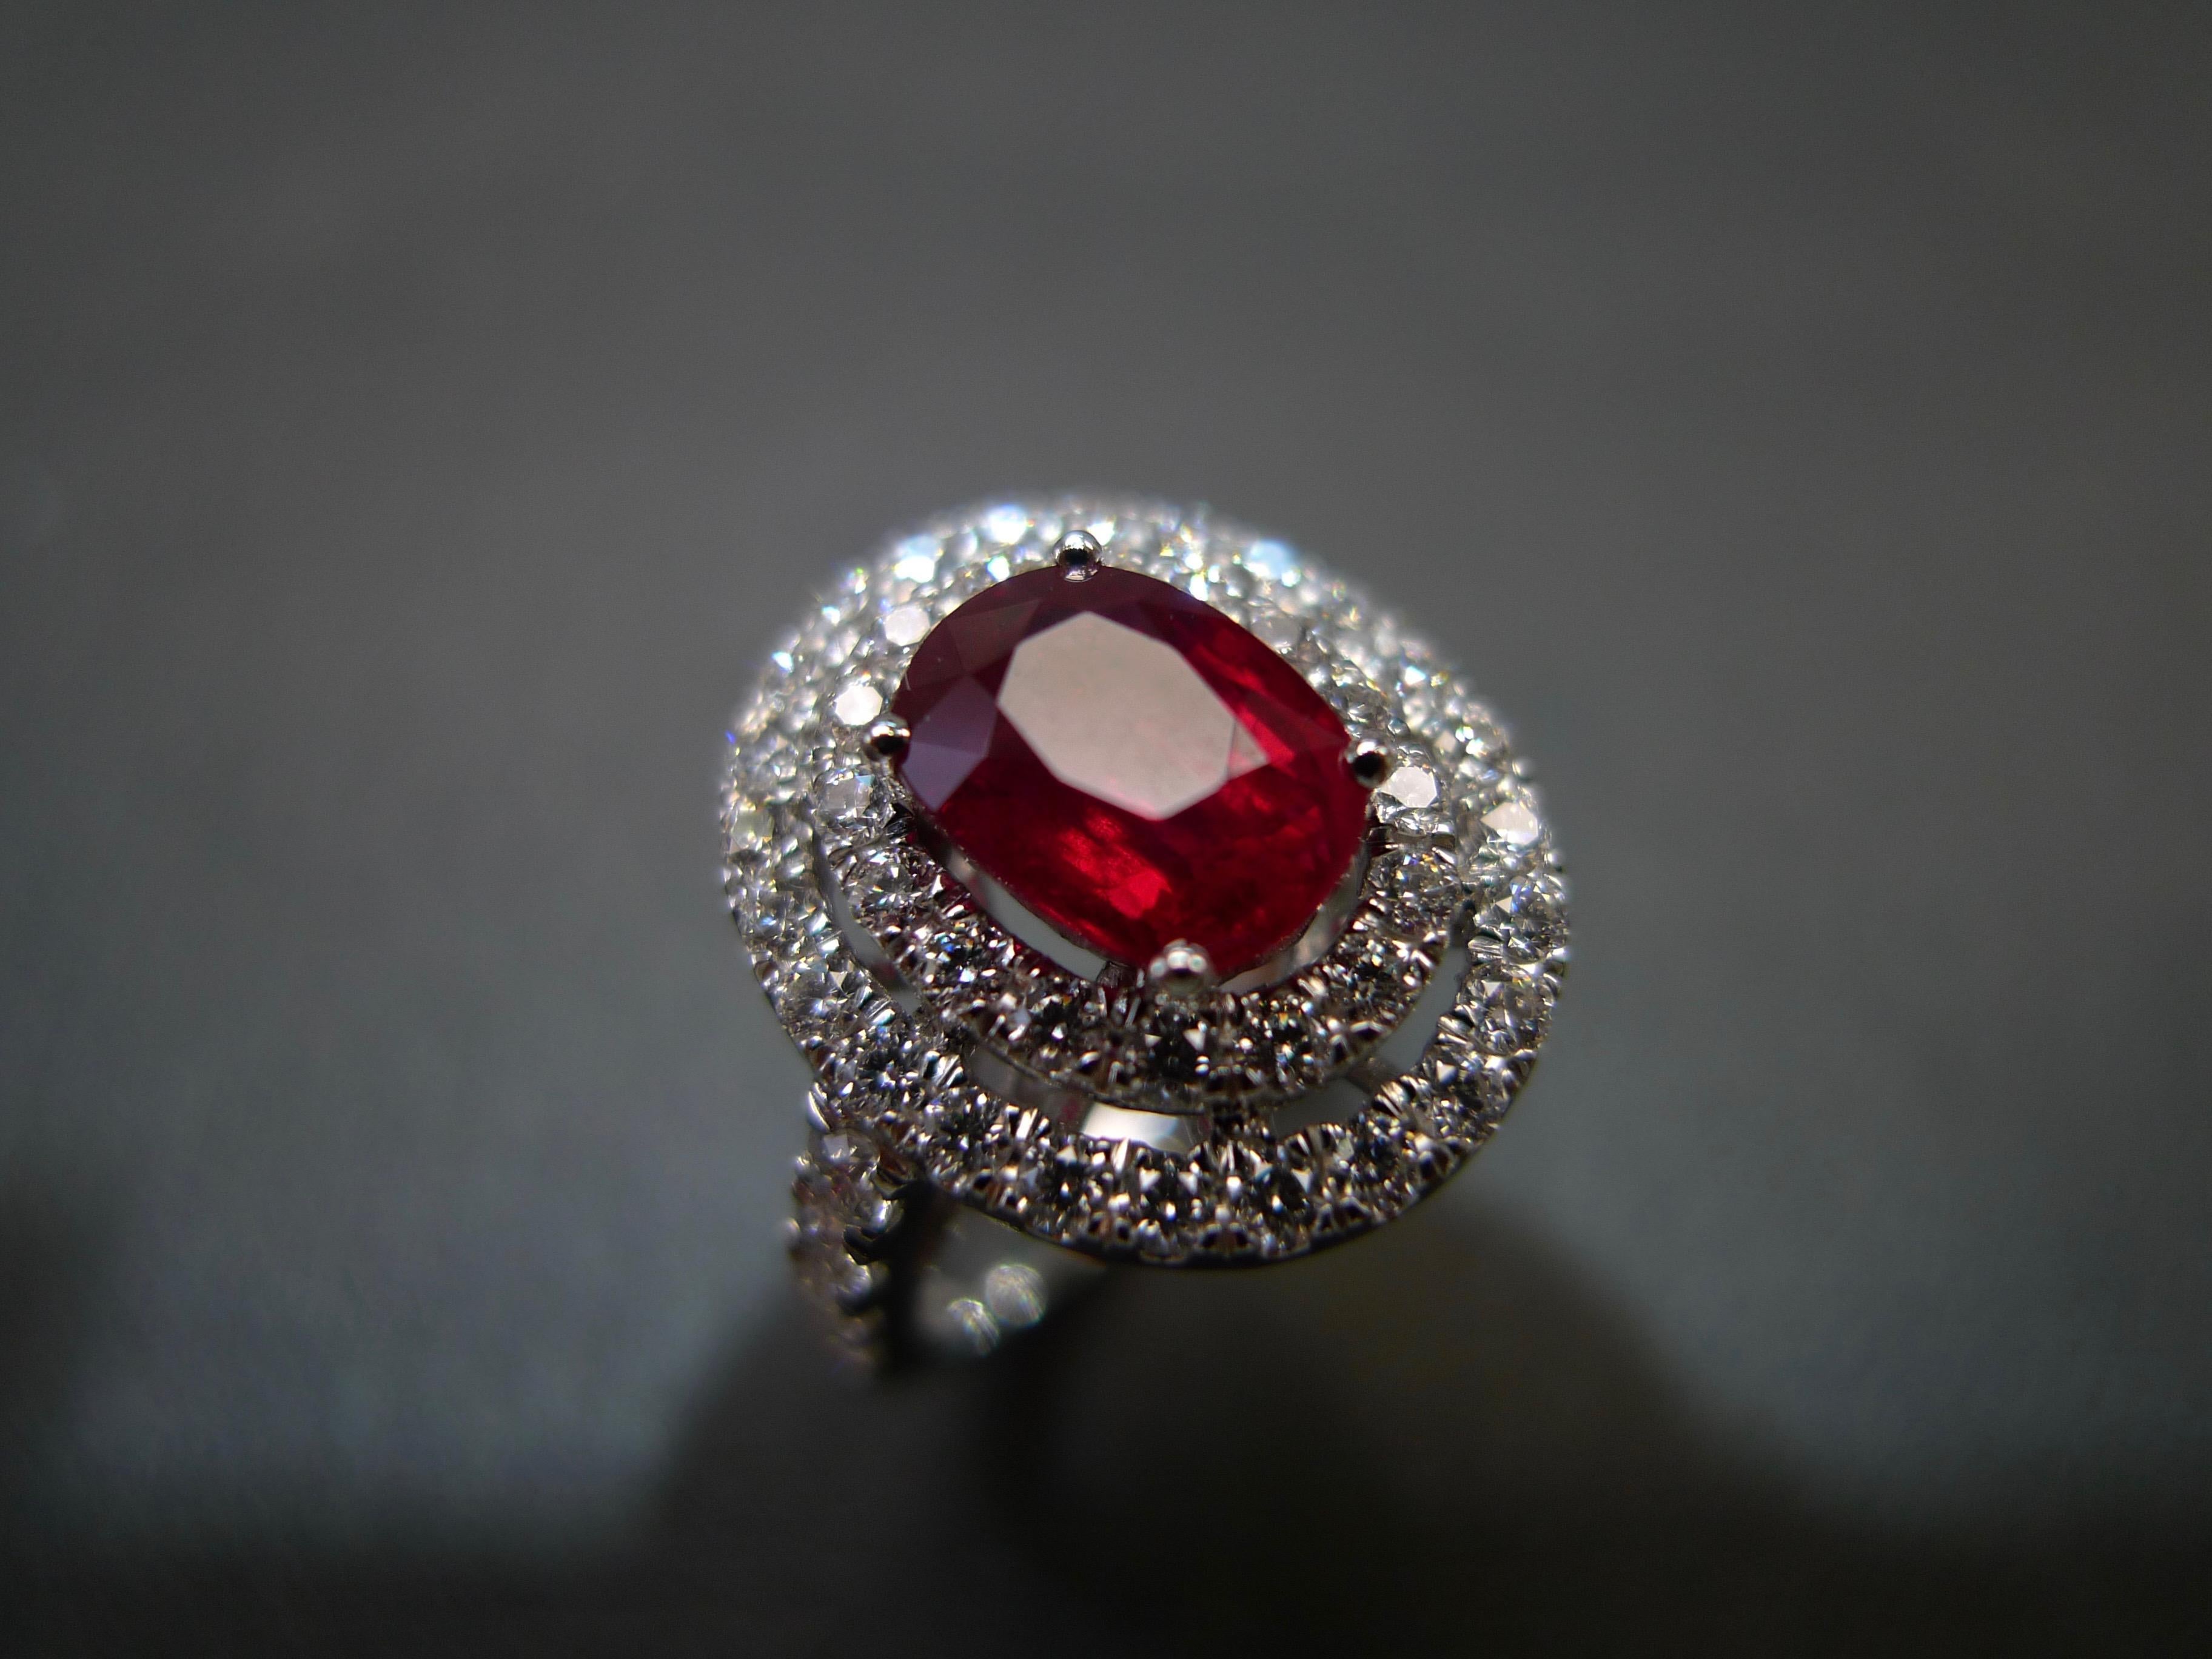 GIA Certificated 2.03 Carat Ruby Vivid Red Pigeon Blood Burma and Diamond Ring For Sale 4